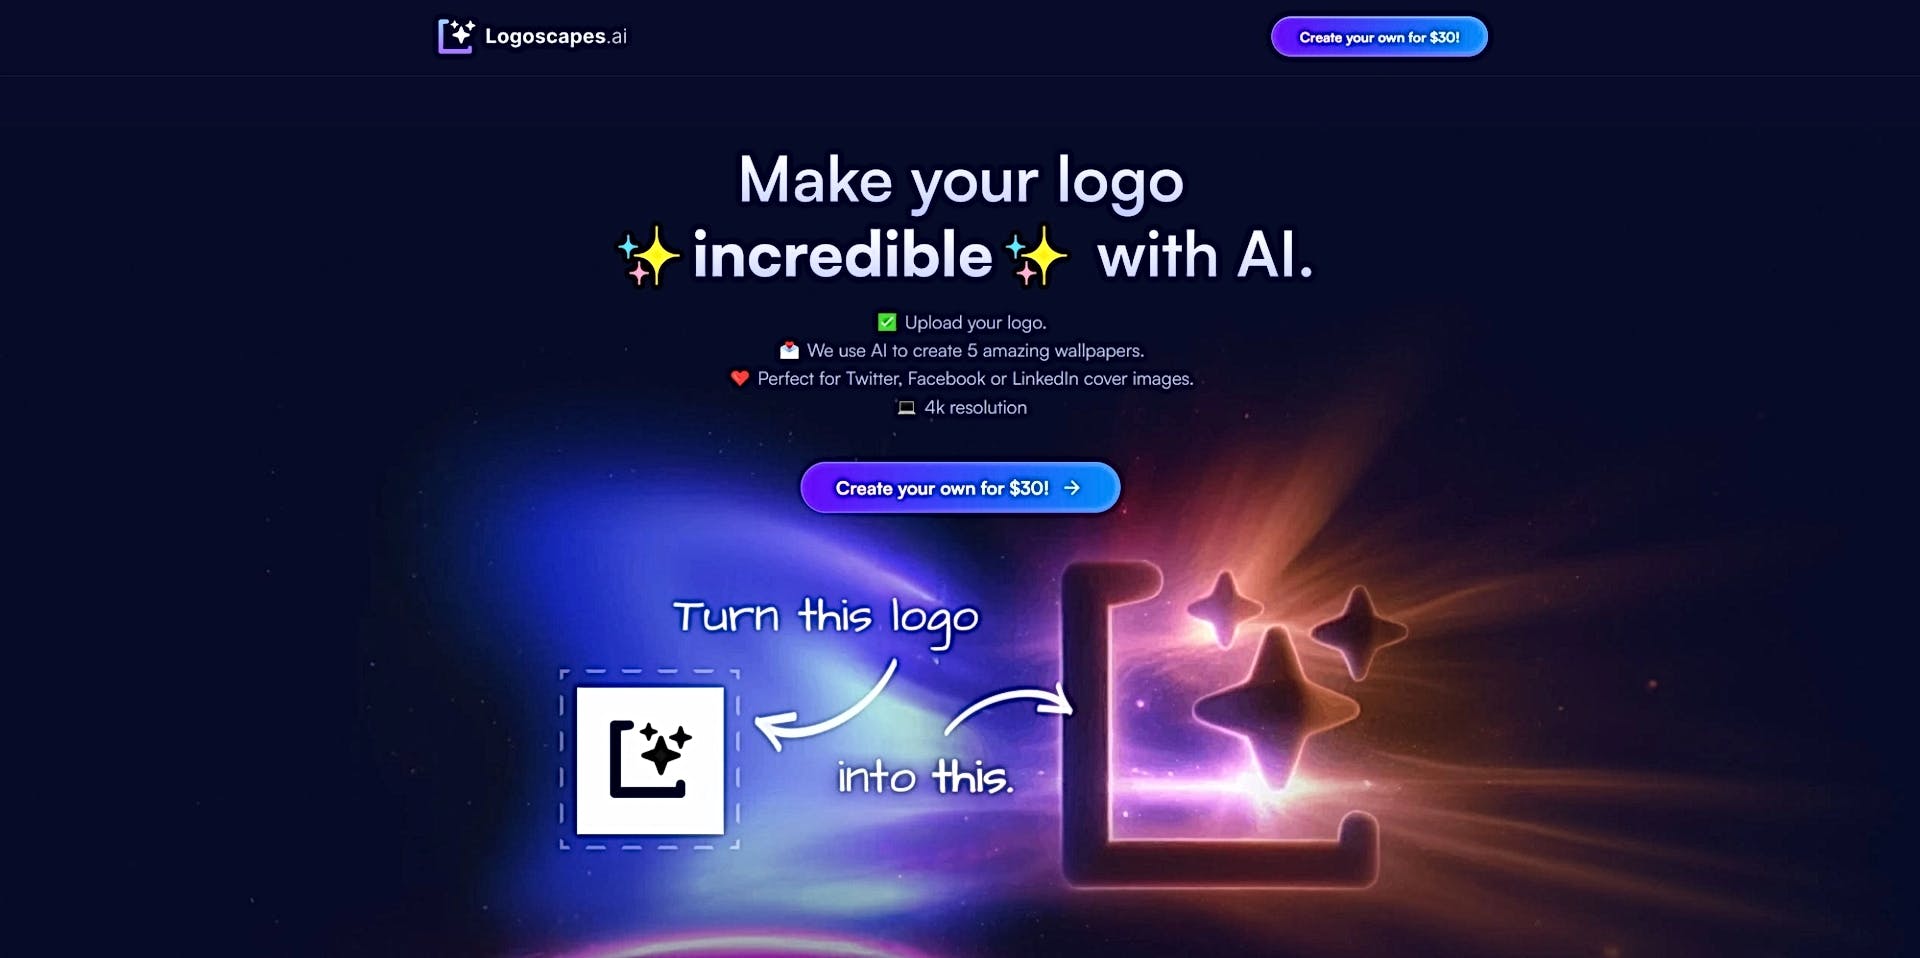 Logoscapes featured